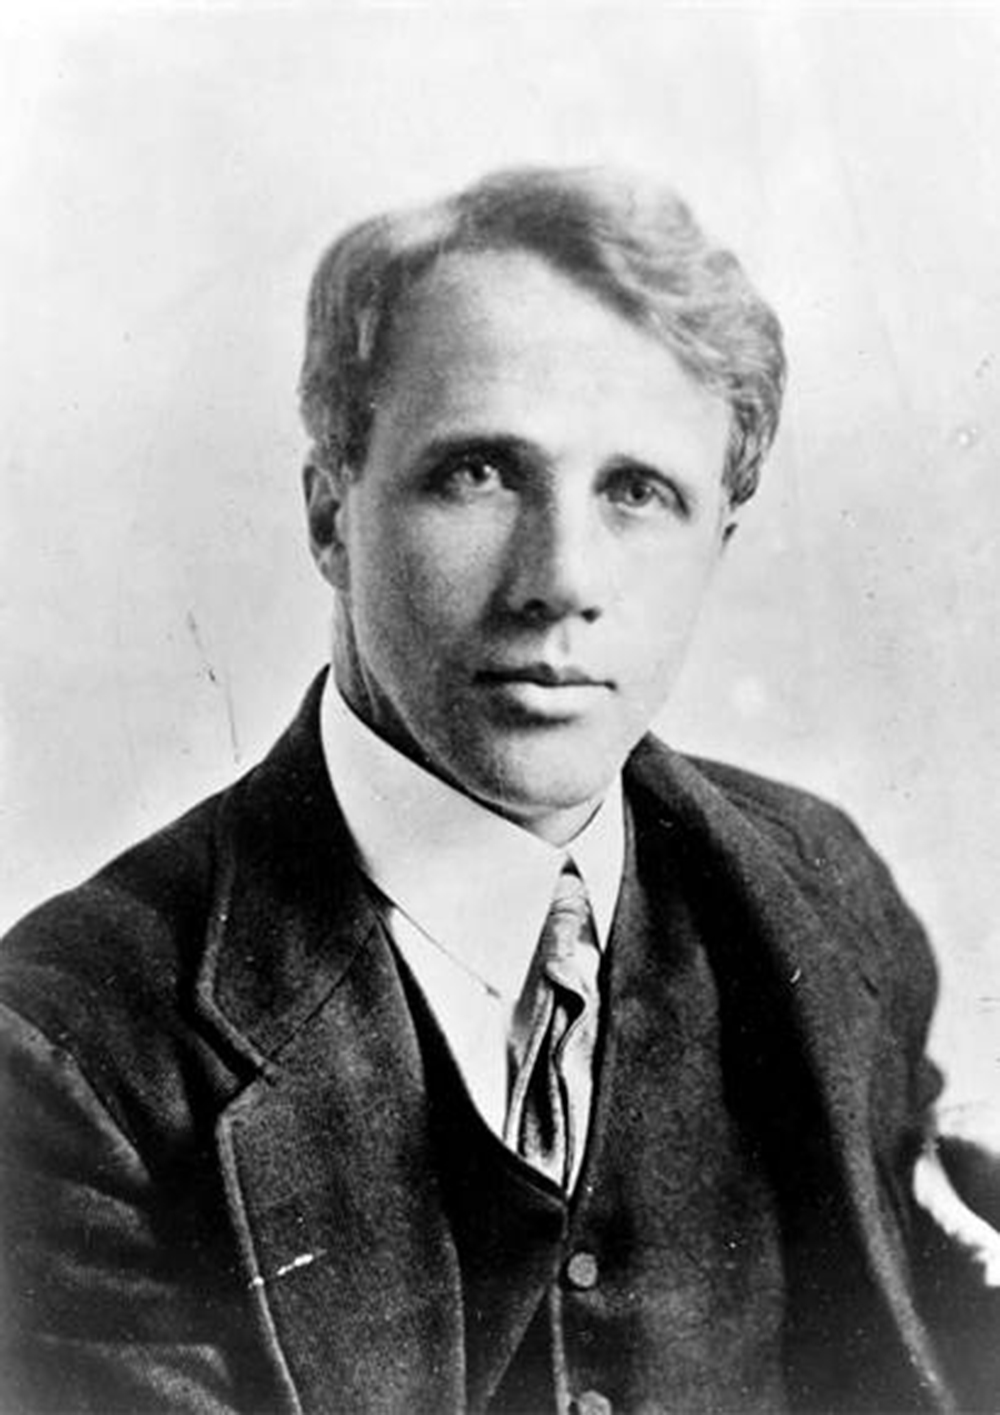 Robert Frost, c. 1915. Library of Congress, Prints and Photographs Division.